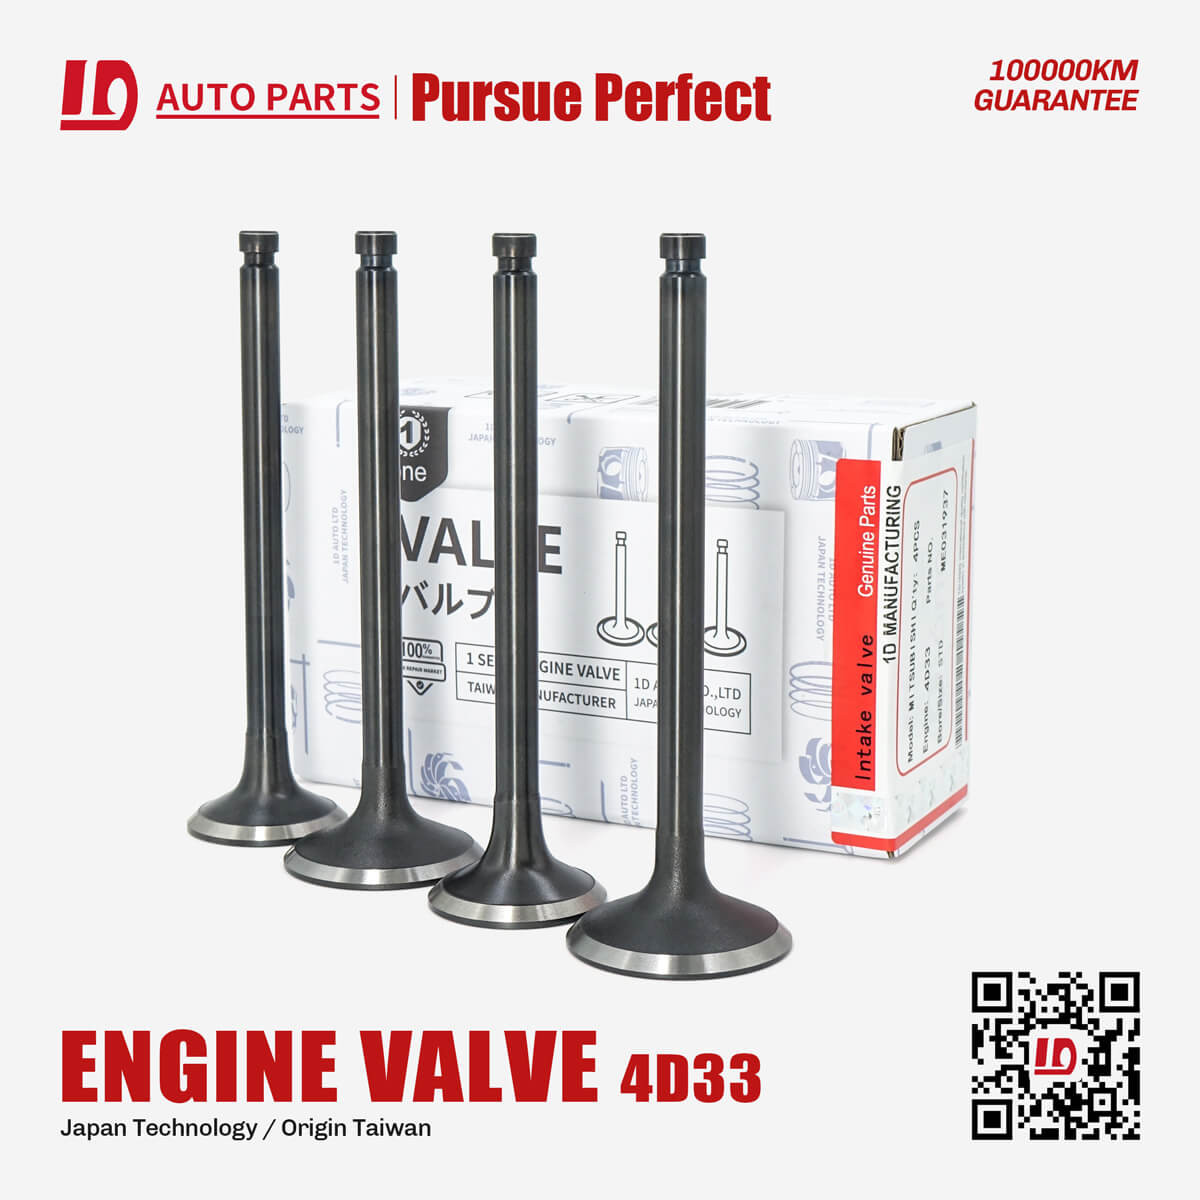 Engine valves ME031937 intake and ME031939 exhaust valves For engine valve 4D33